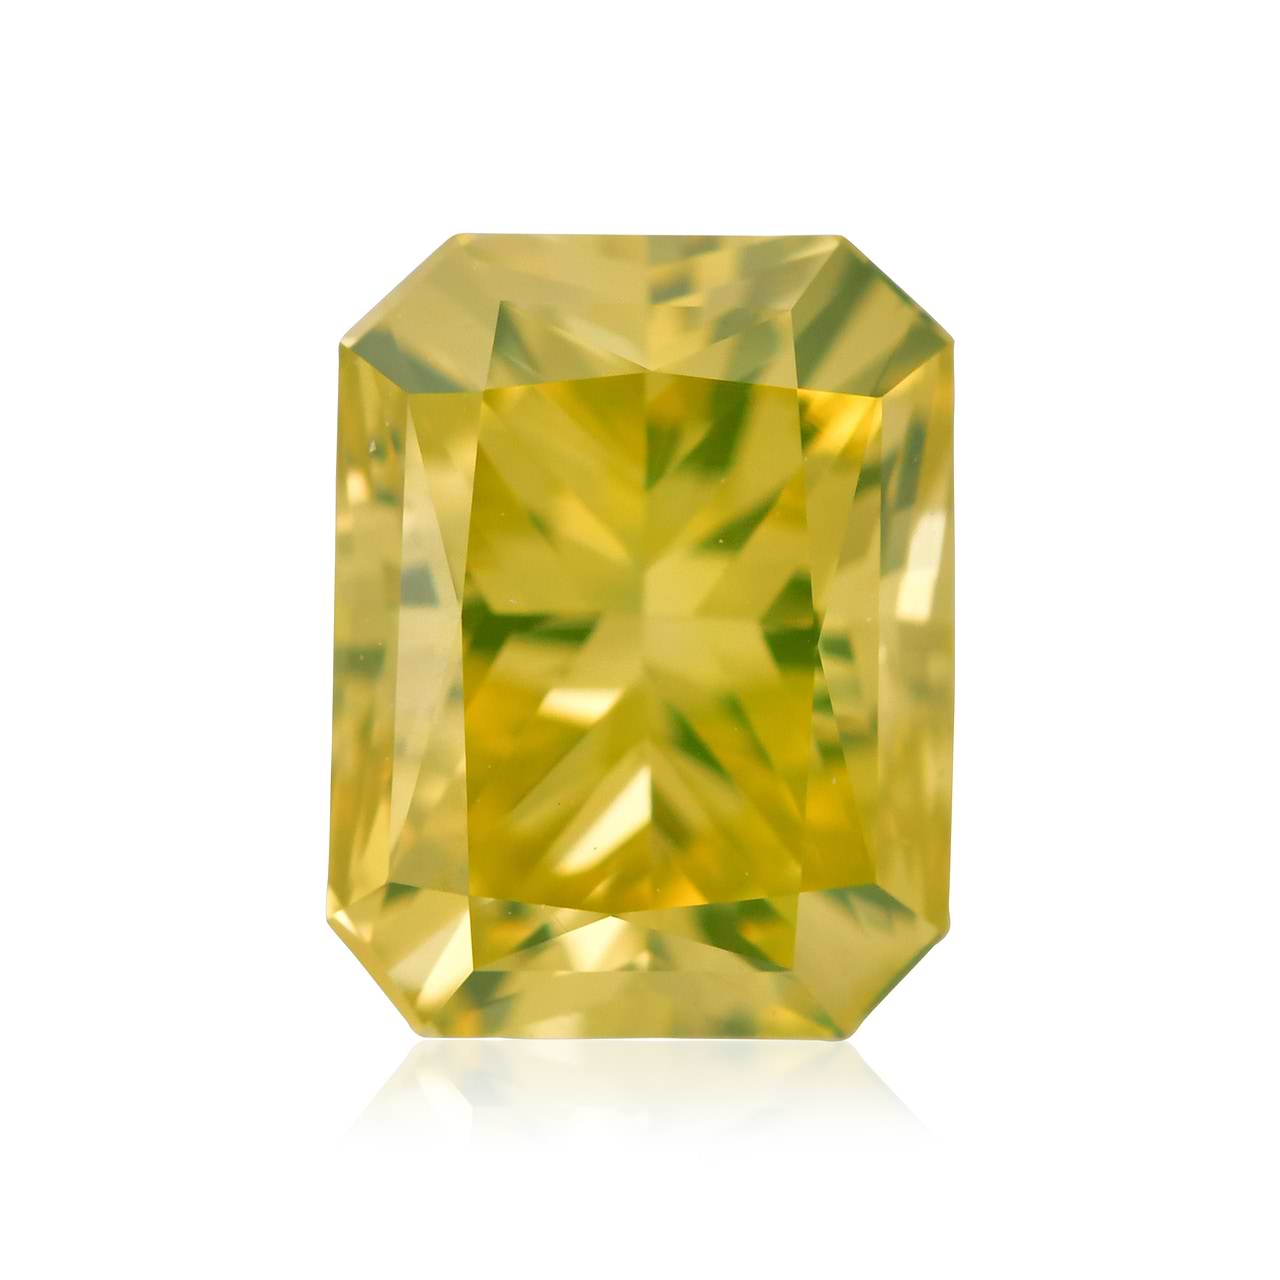 0073ctカラーFANCY INTENSE YELLOW GREEN 0.073ct RCT - その他